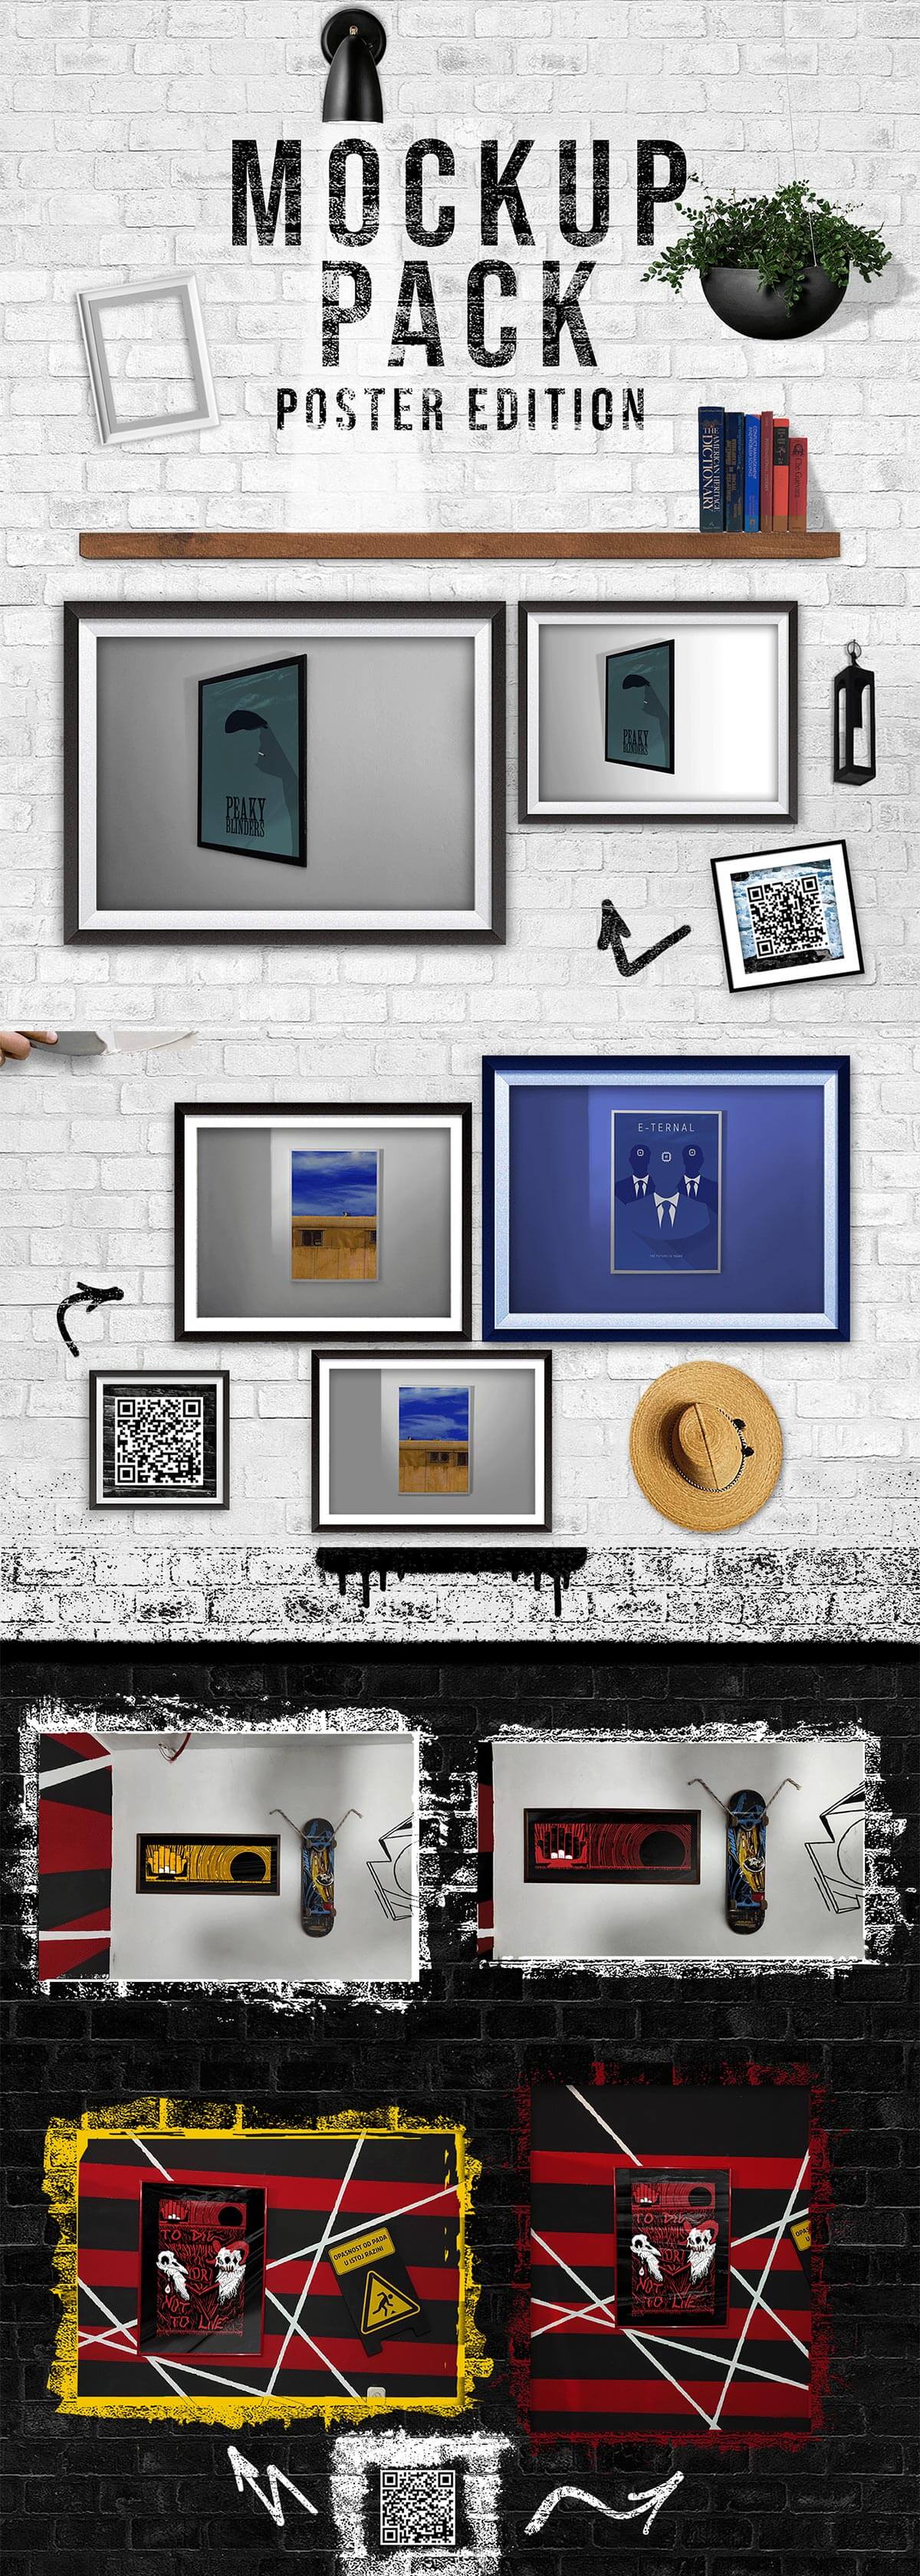 Poster Mockup Collection